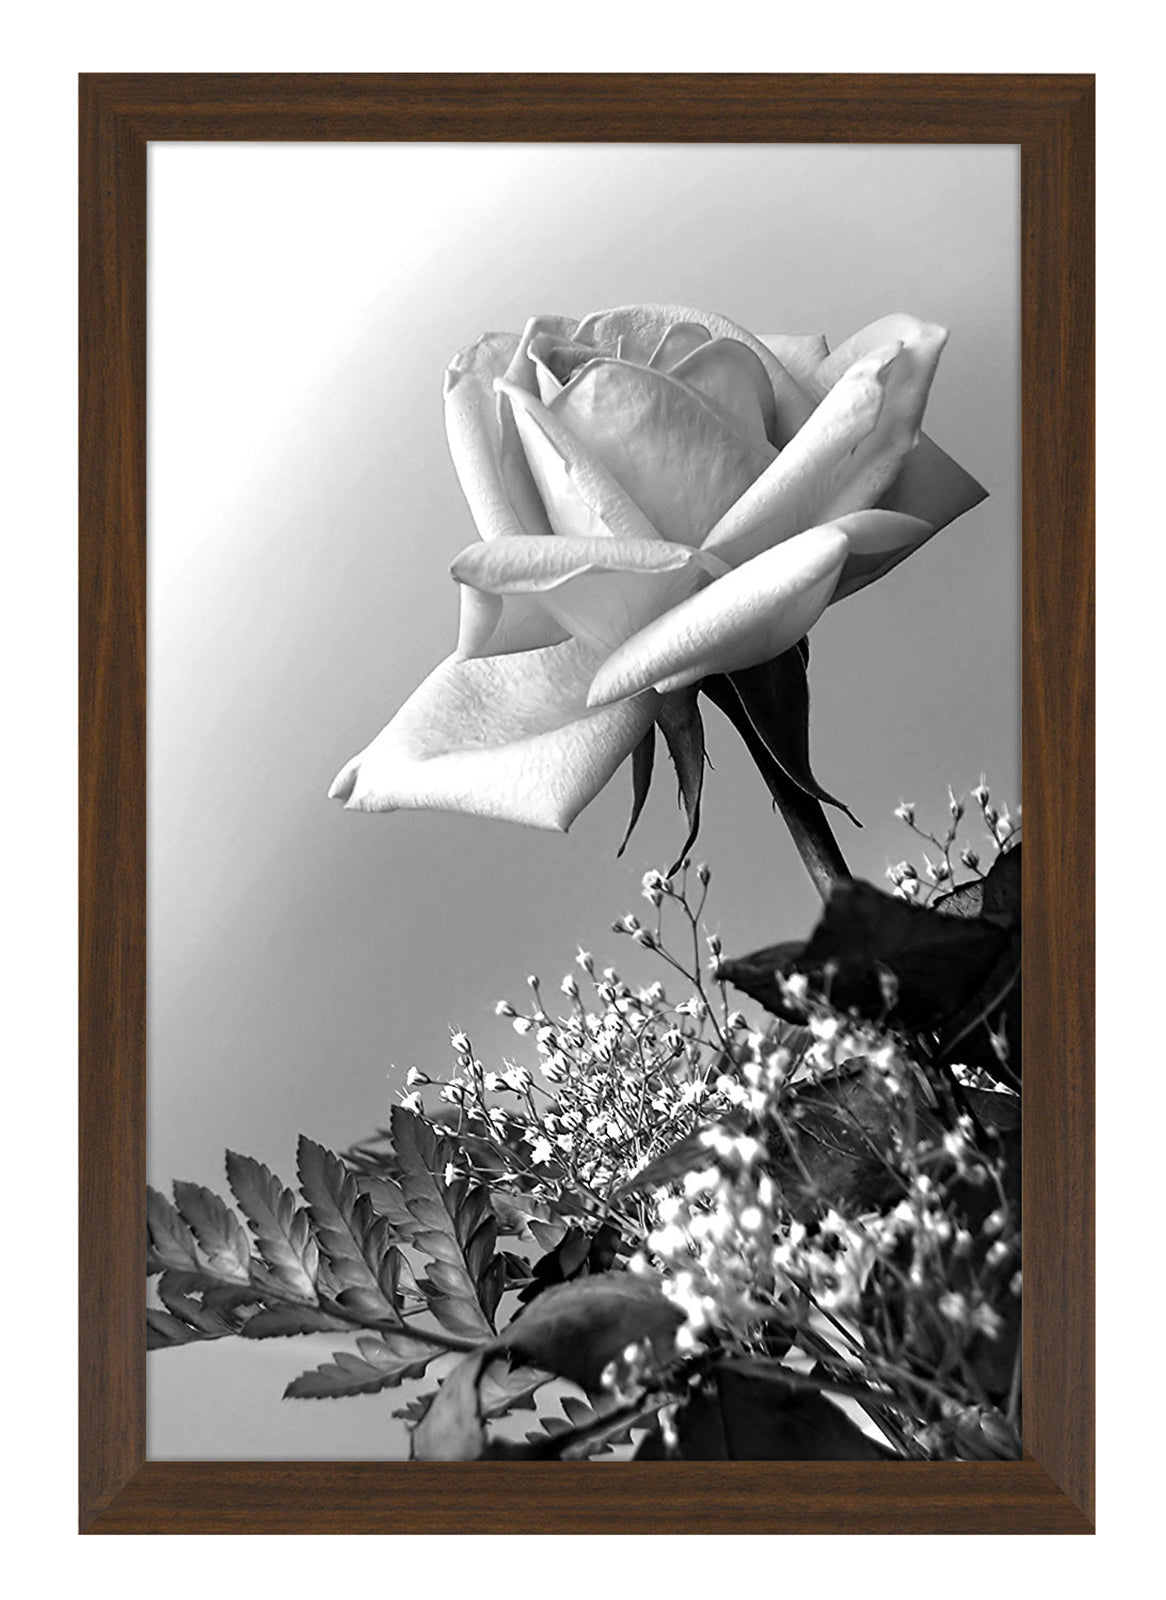 Signature Poster Frame or Picture Frame | Choose Size and Color